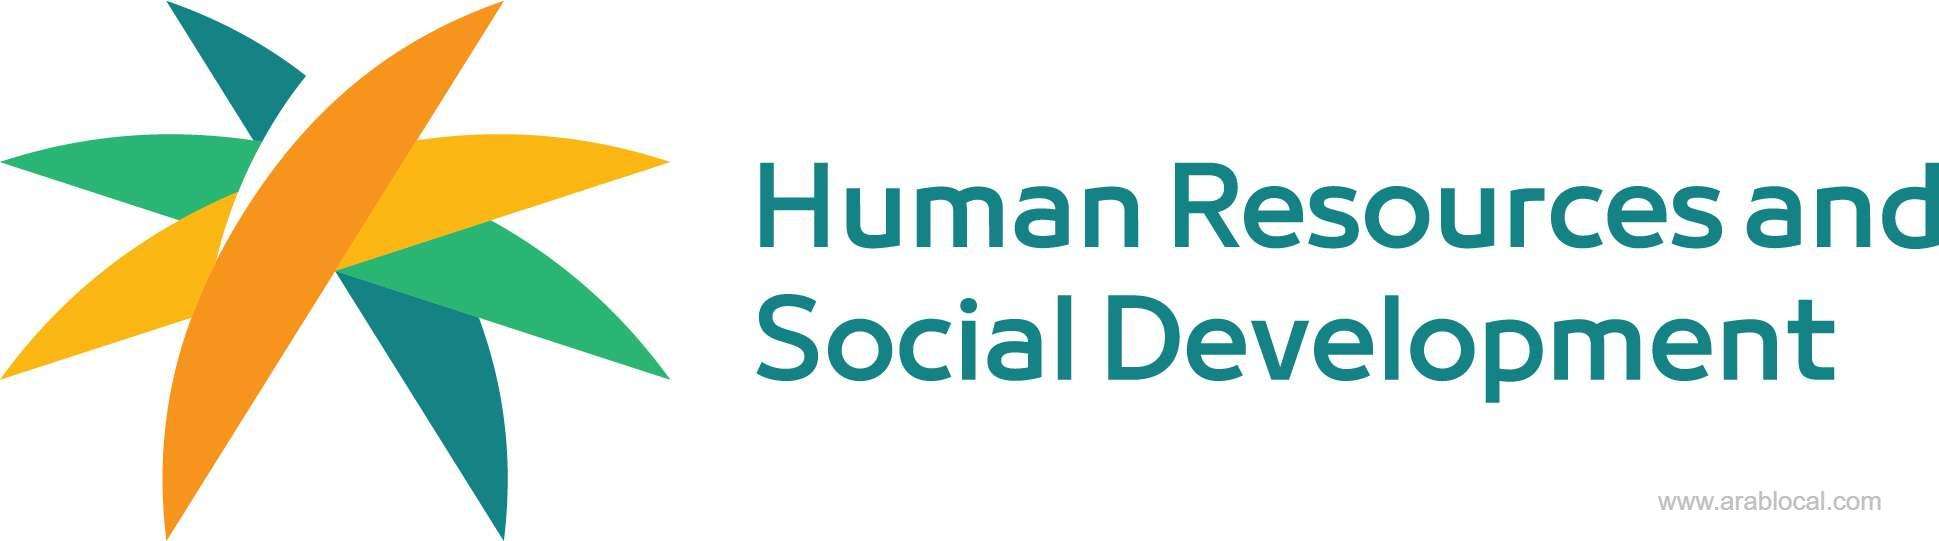 hrsd-launches-the-professional-verification-program-to-ensure-the-competence-of-skilled-workers-in-the-saudi-labor-market-saudi